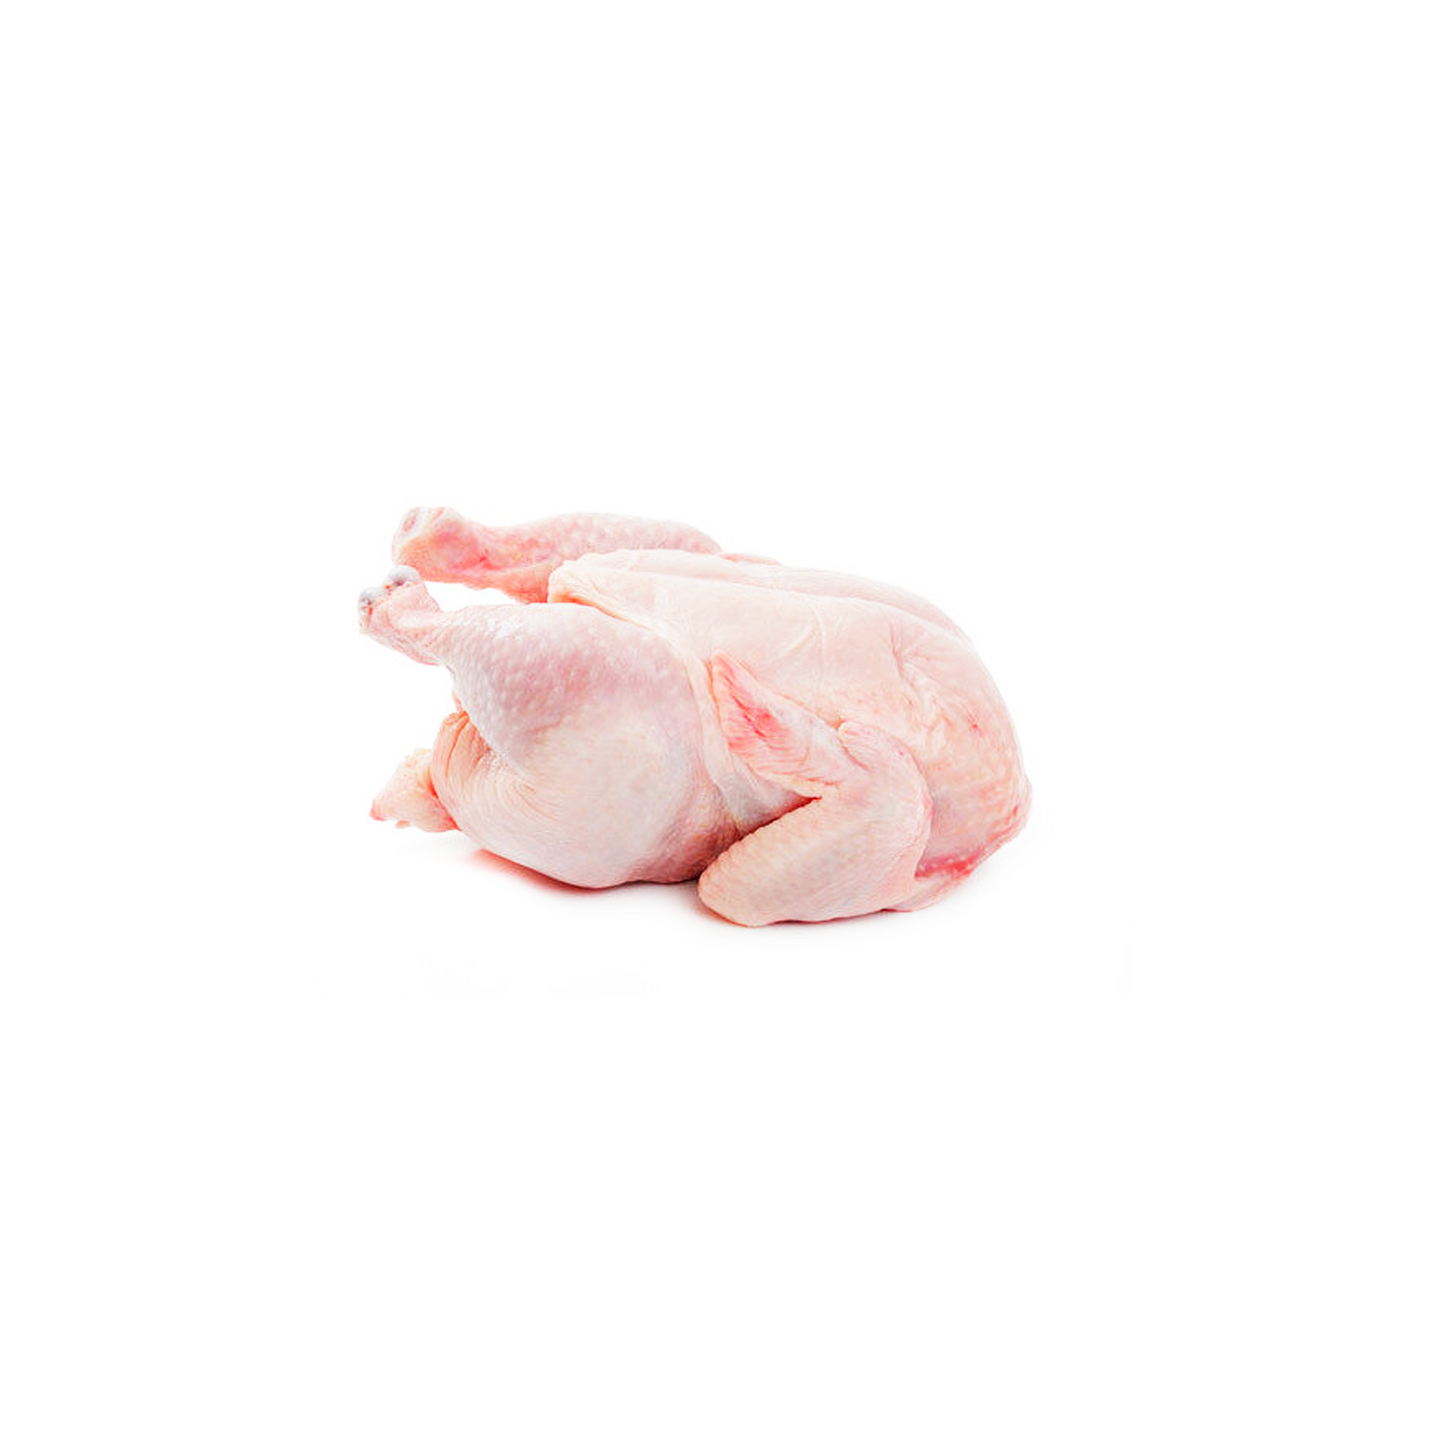 Otto's All Natural Whole Chicken, Antiobiotic Free